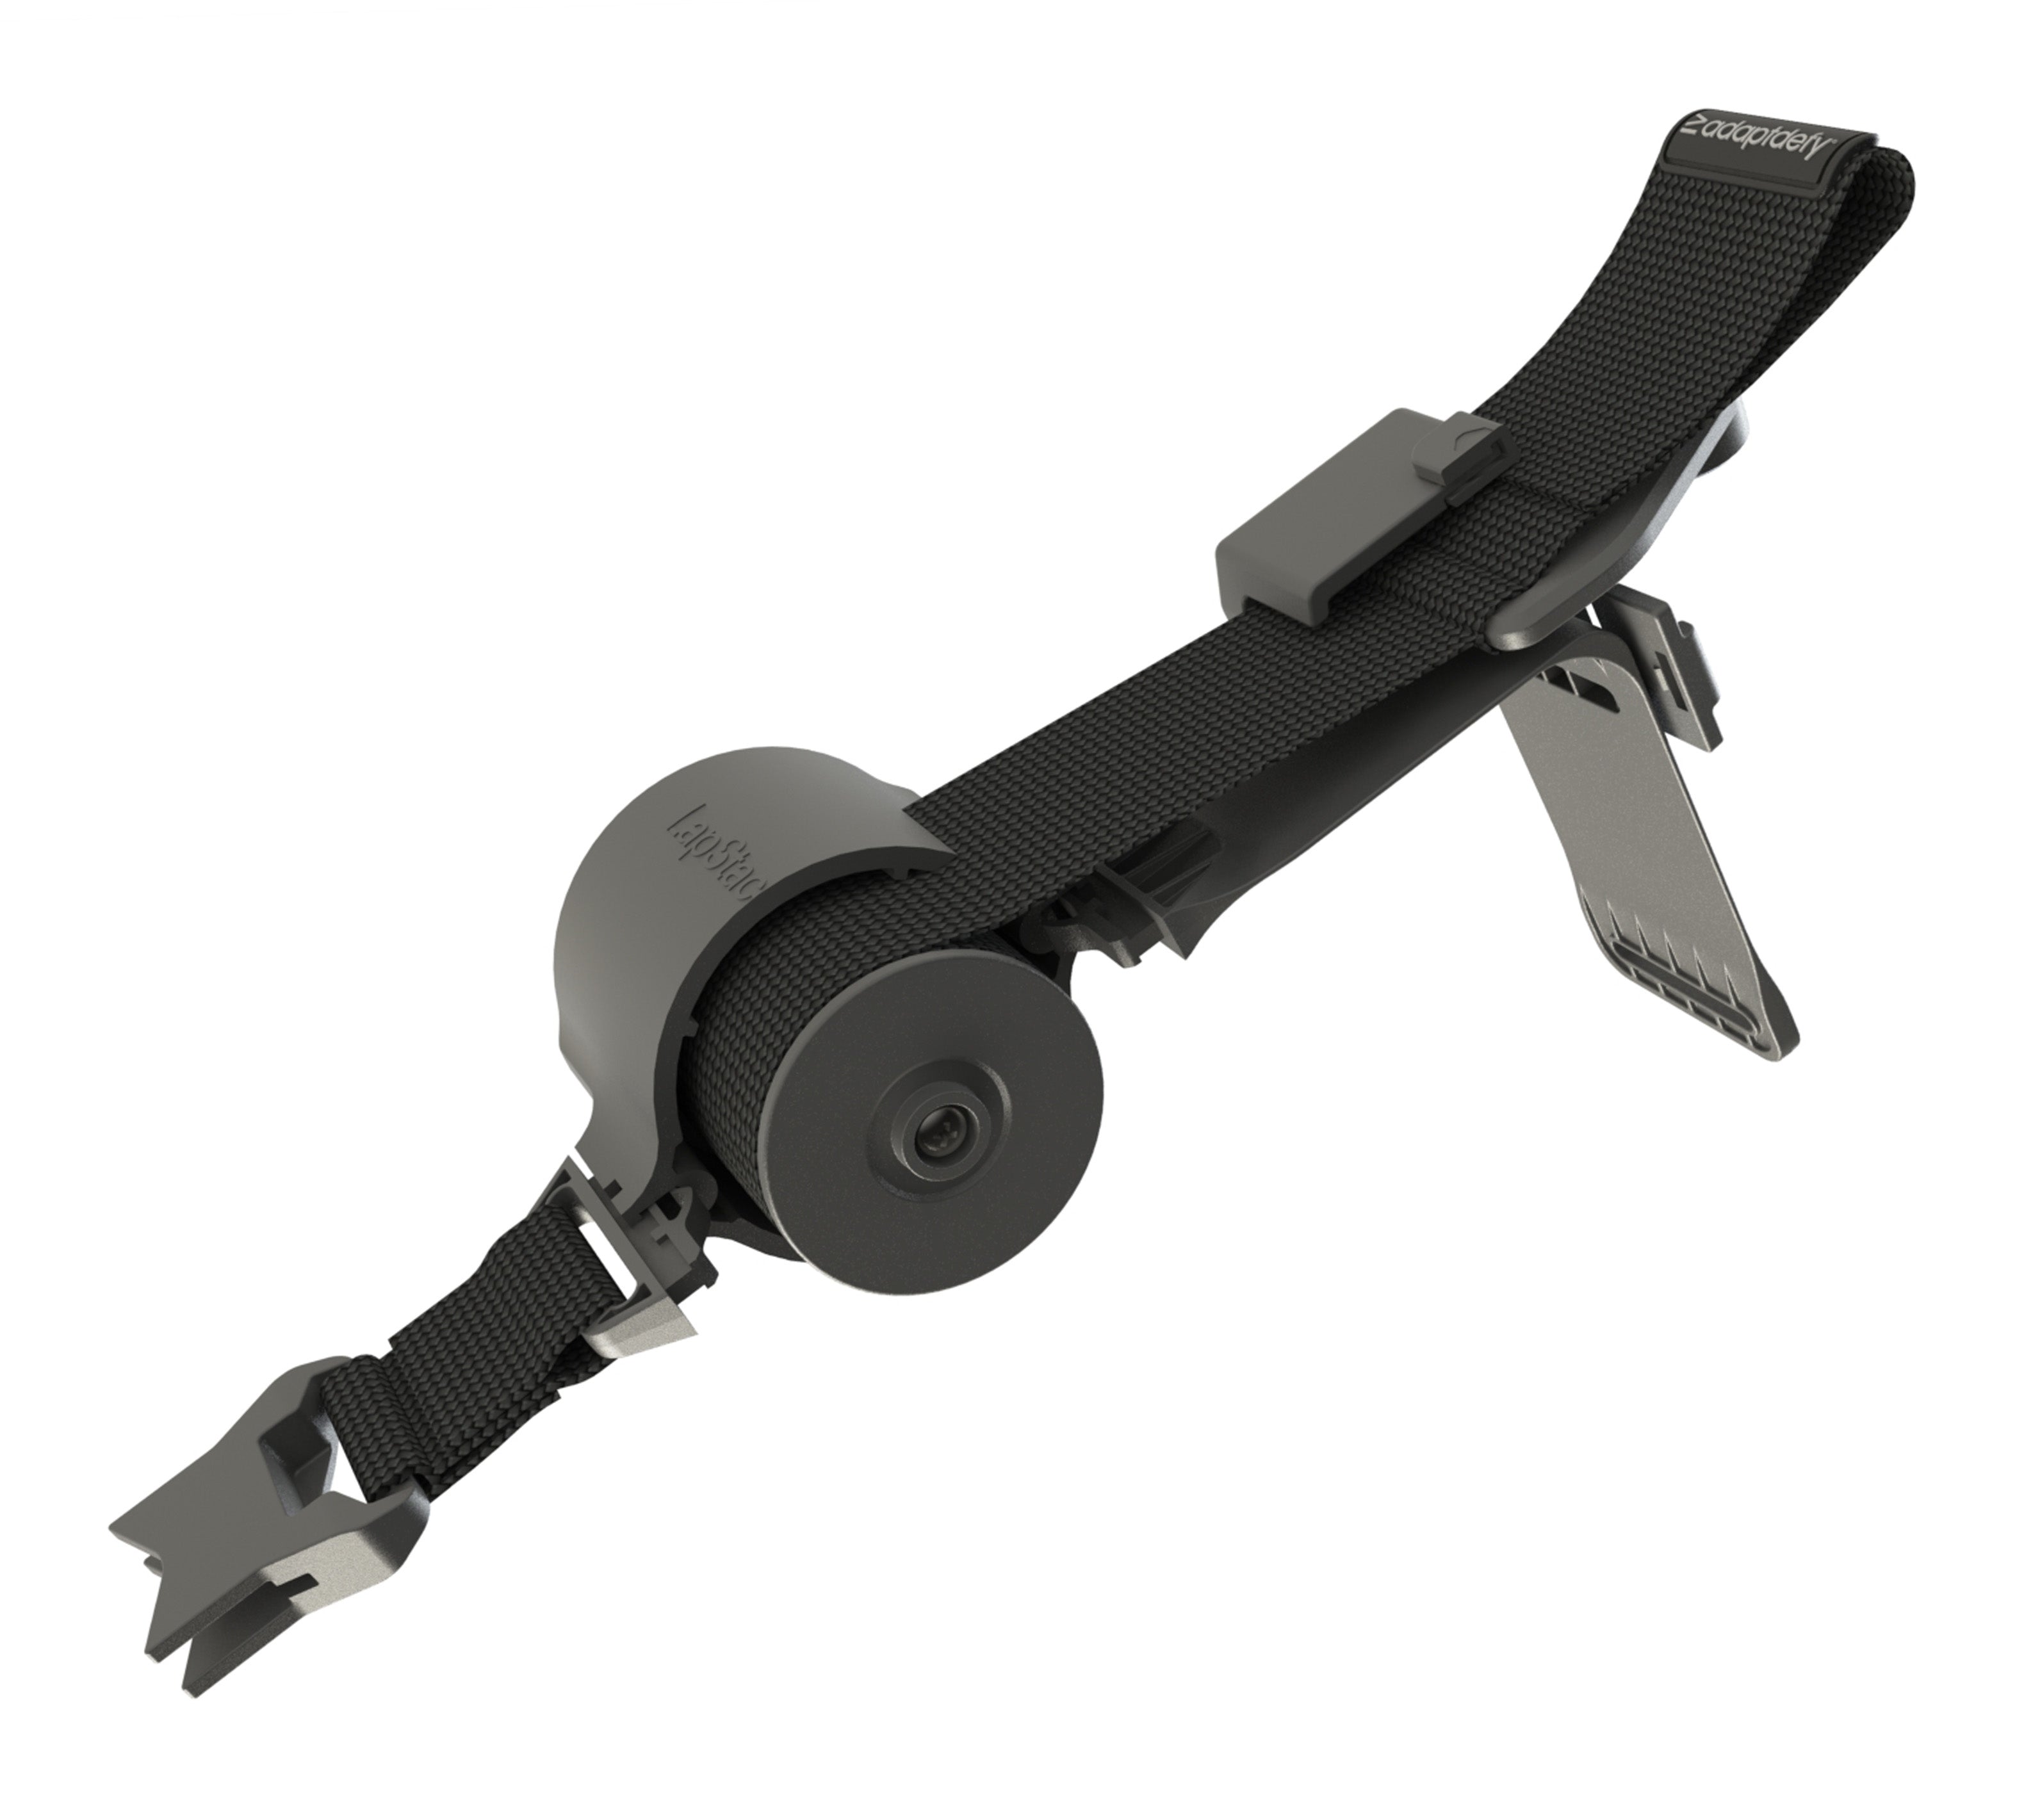 Exploded view of LapStacker Flex components, showing the webbing spool, buckle holder and magnetic buckle